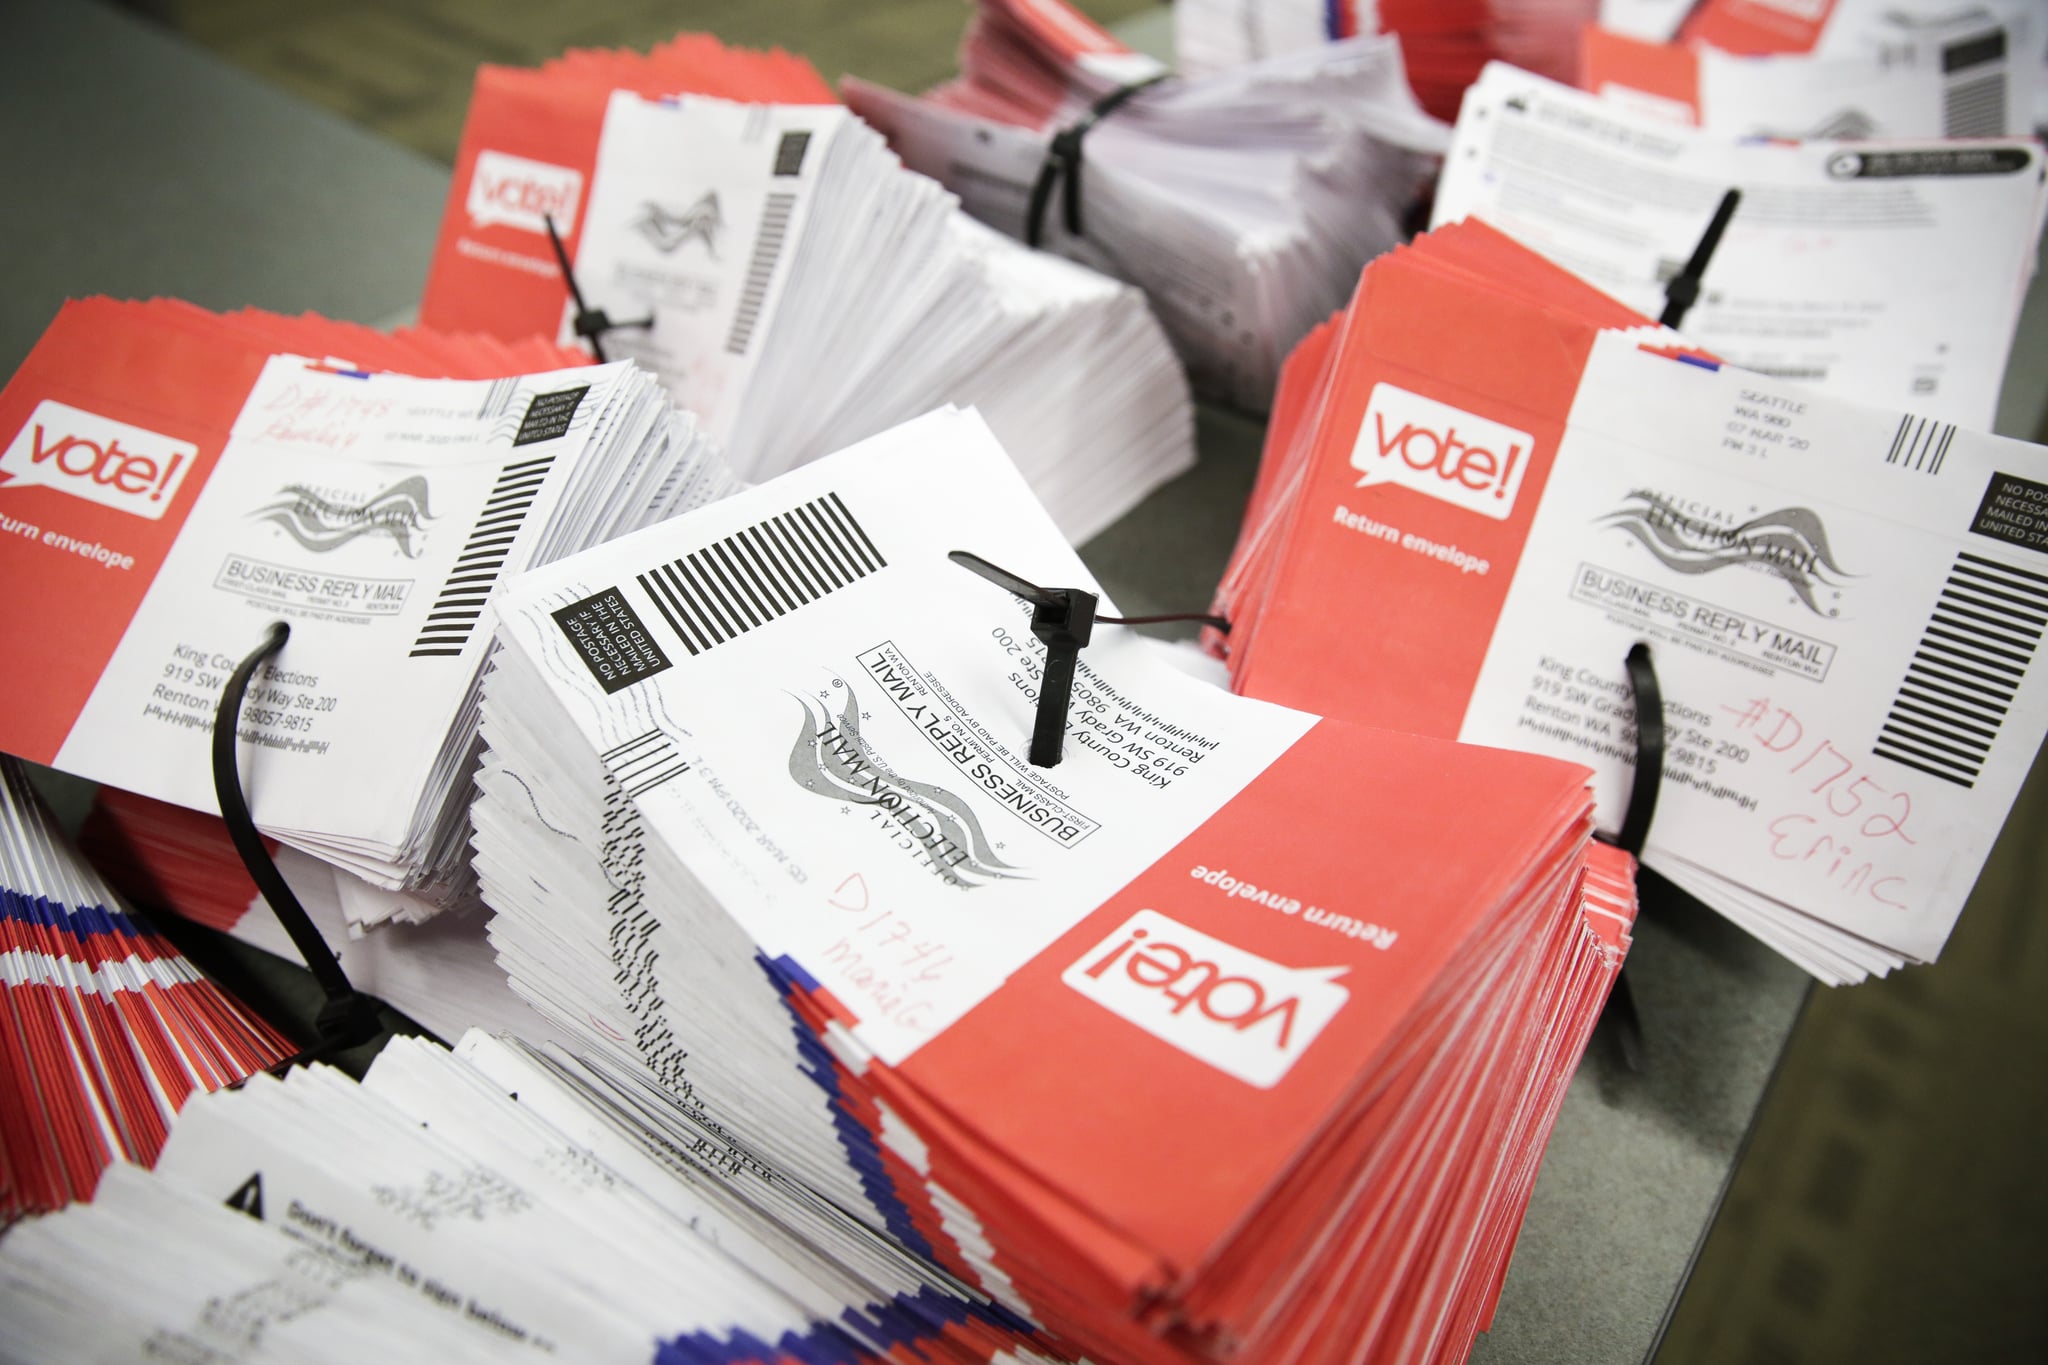 Empty envelopes of opened vote-by-mail ballots for the presidential primary are stacked on a table at King County Elections in Renton, Washington on March 10, 2020. (Photo by Jason Redmond / AFP) (Photo by JASON REDMOND/AFP via Getty Images)